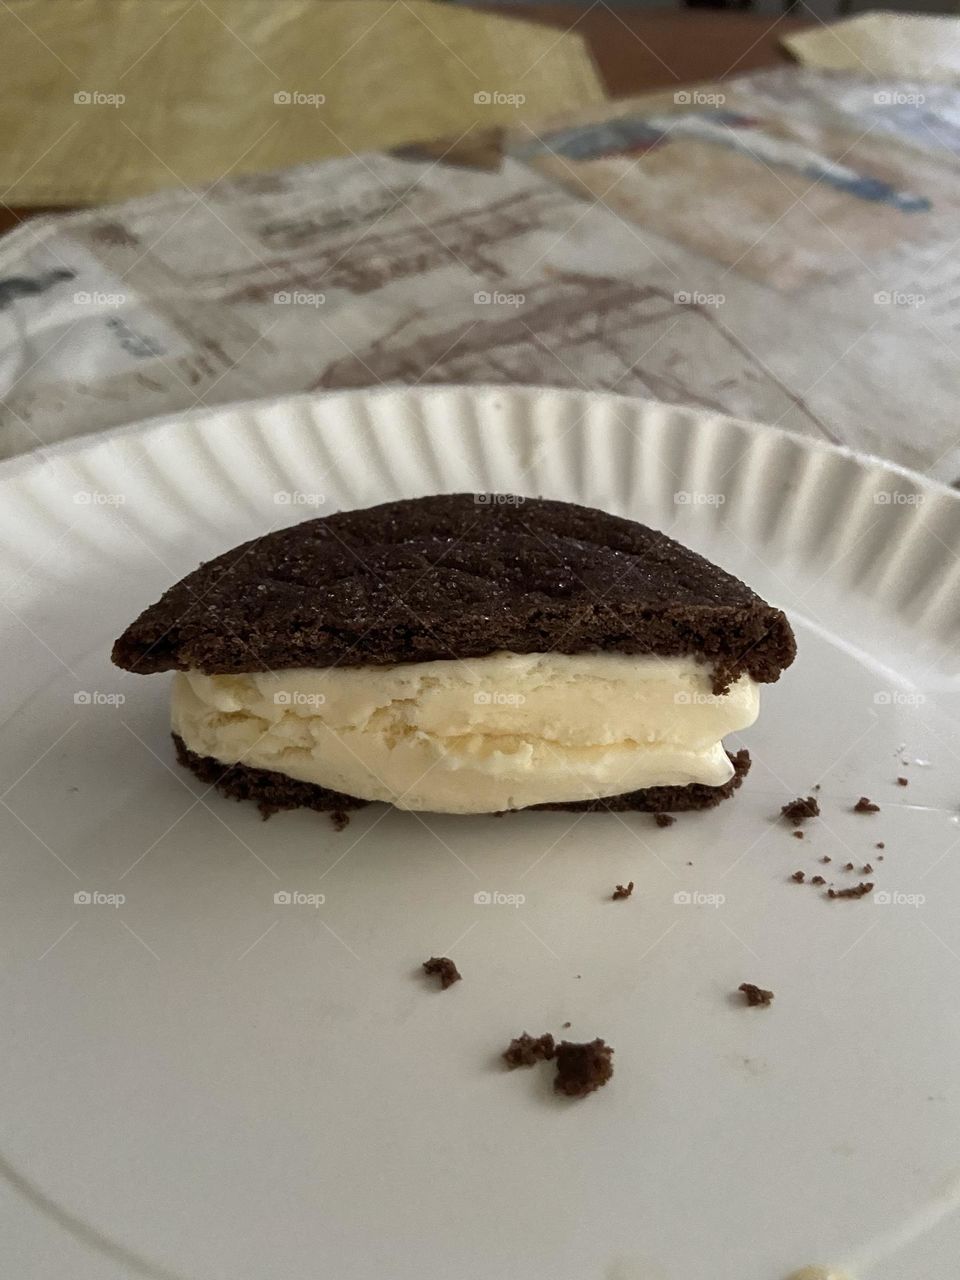 Ice cream sandwich made by putting vanilla ice cream between two halves of a chocolate cookie. I used Stop & Shop Brand Churn style ice cream and an Archway Dutch Chocolate Cookie. Yum 😋